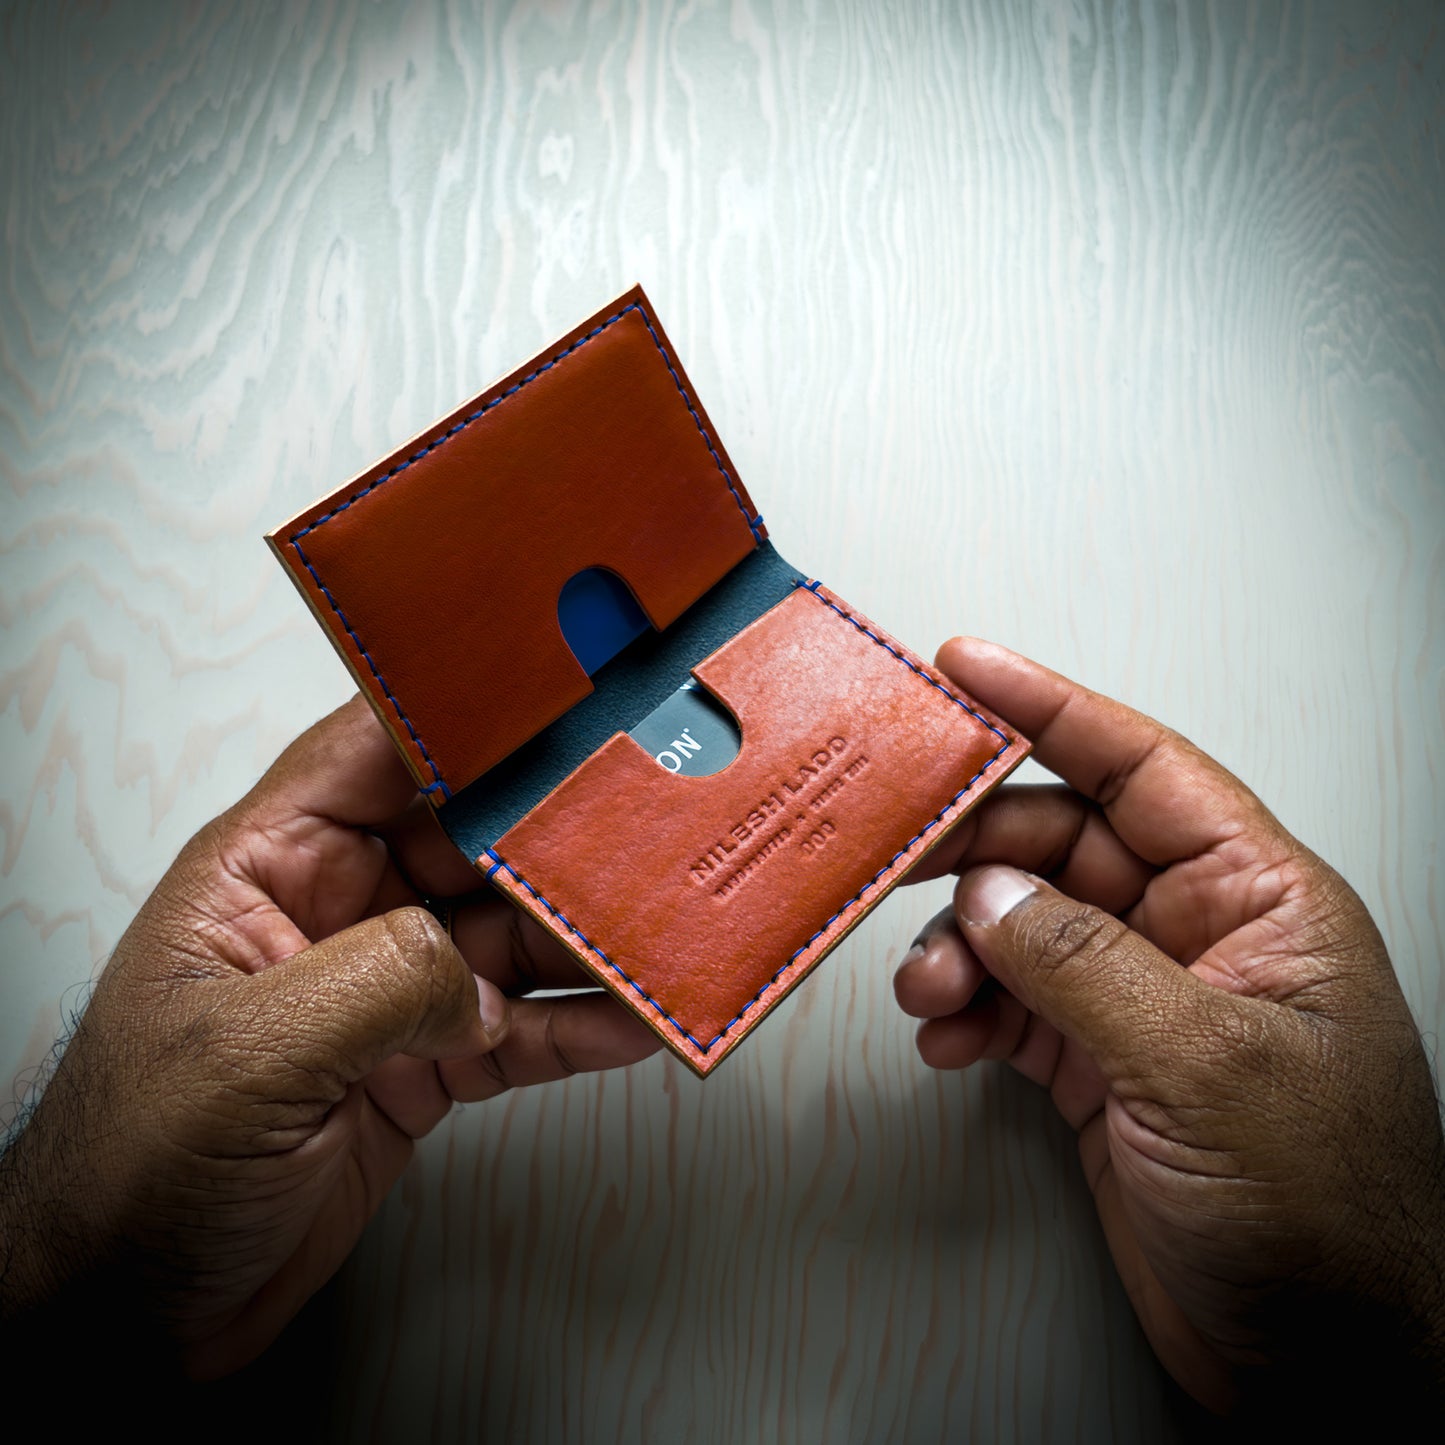 Slim Leather Wallet in Cognac leather handmade in Canada